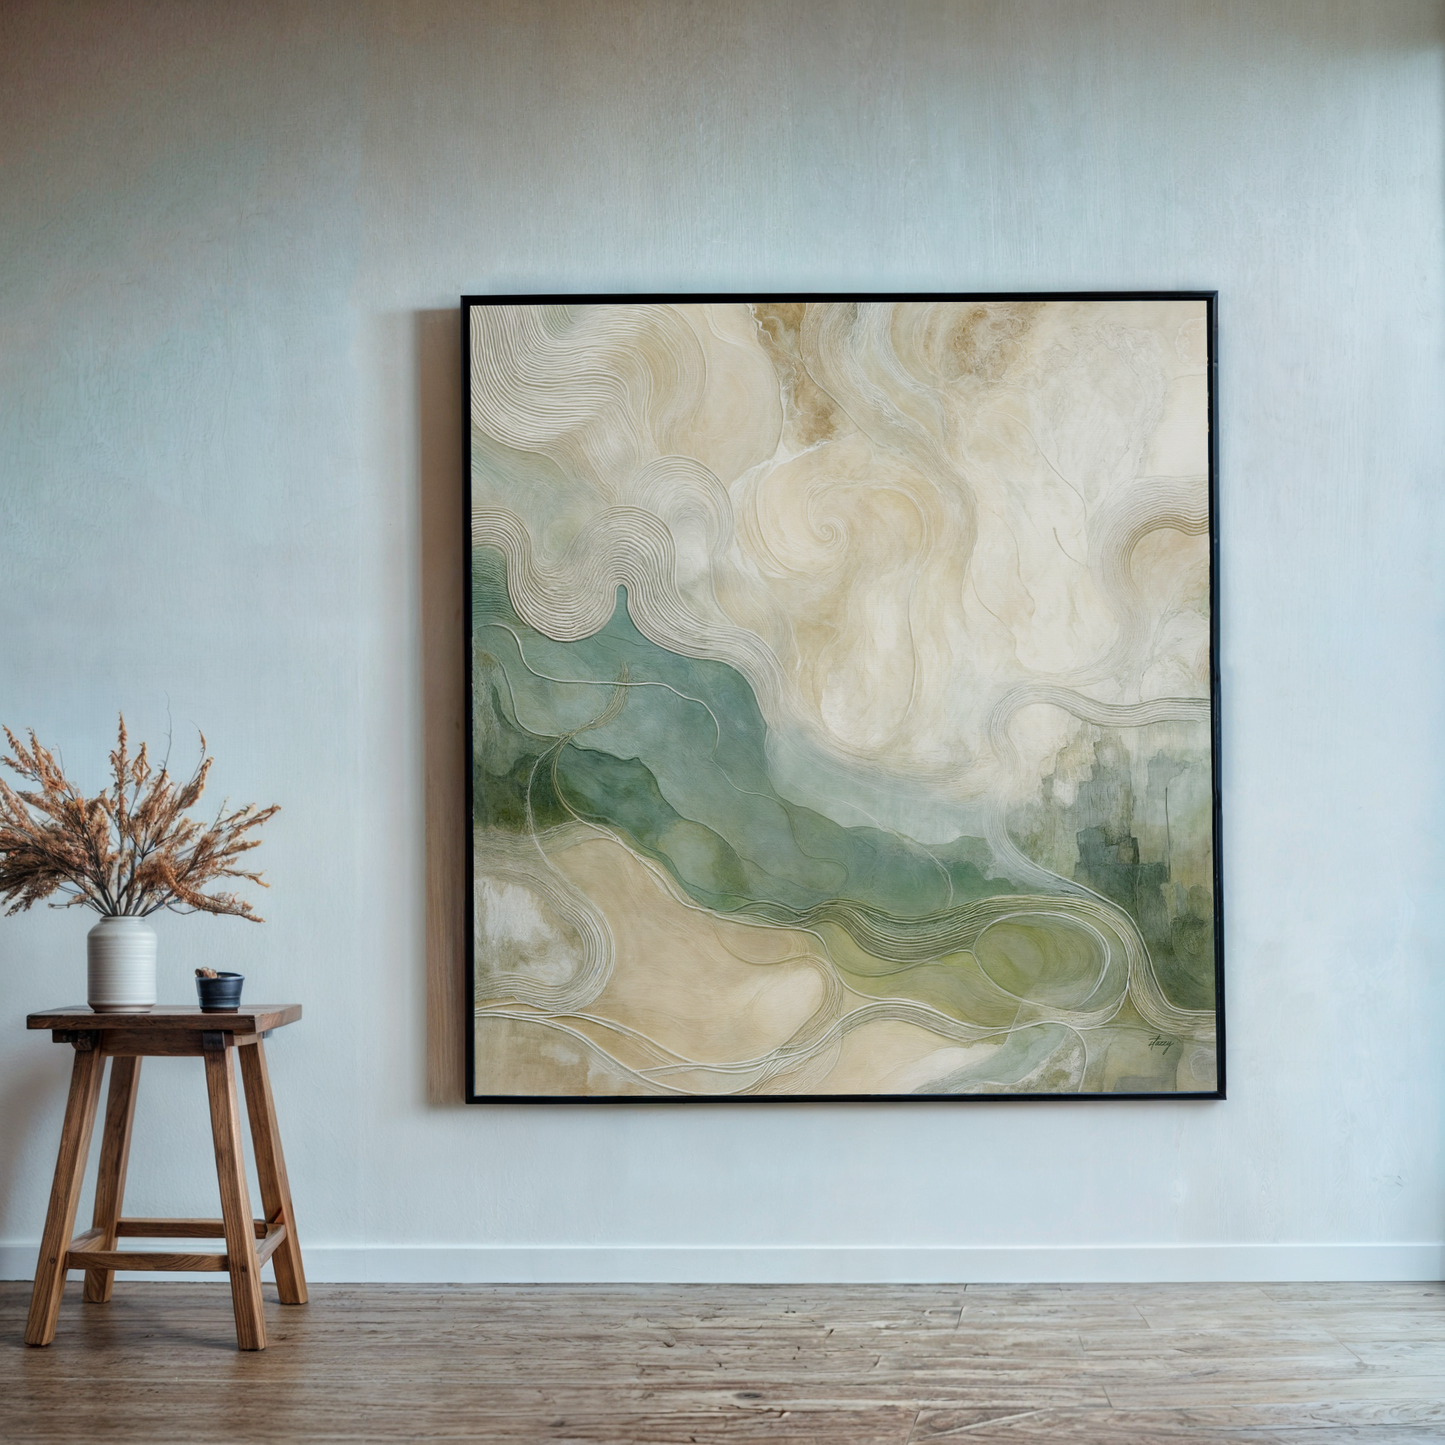 Canvas Print: "Whispering Currents"